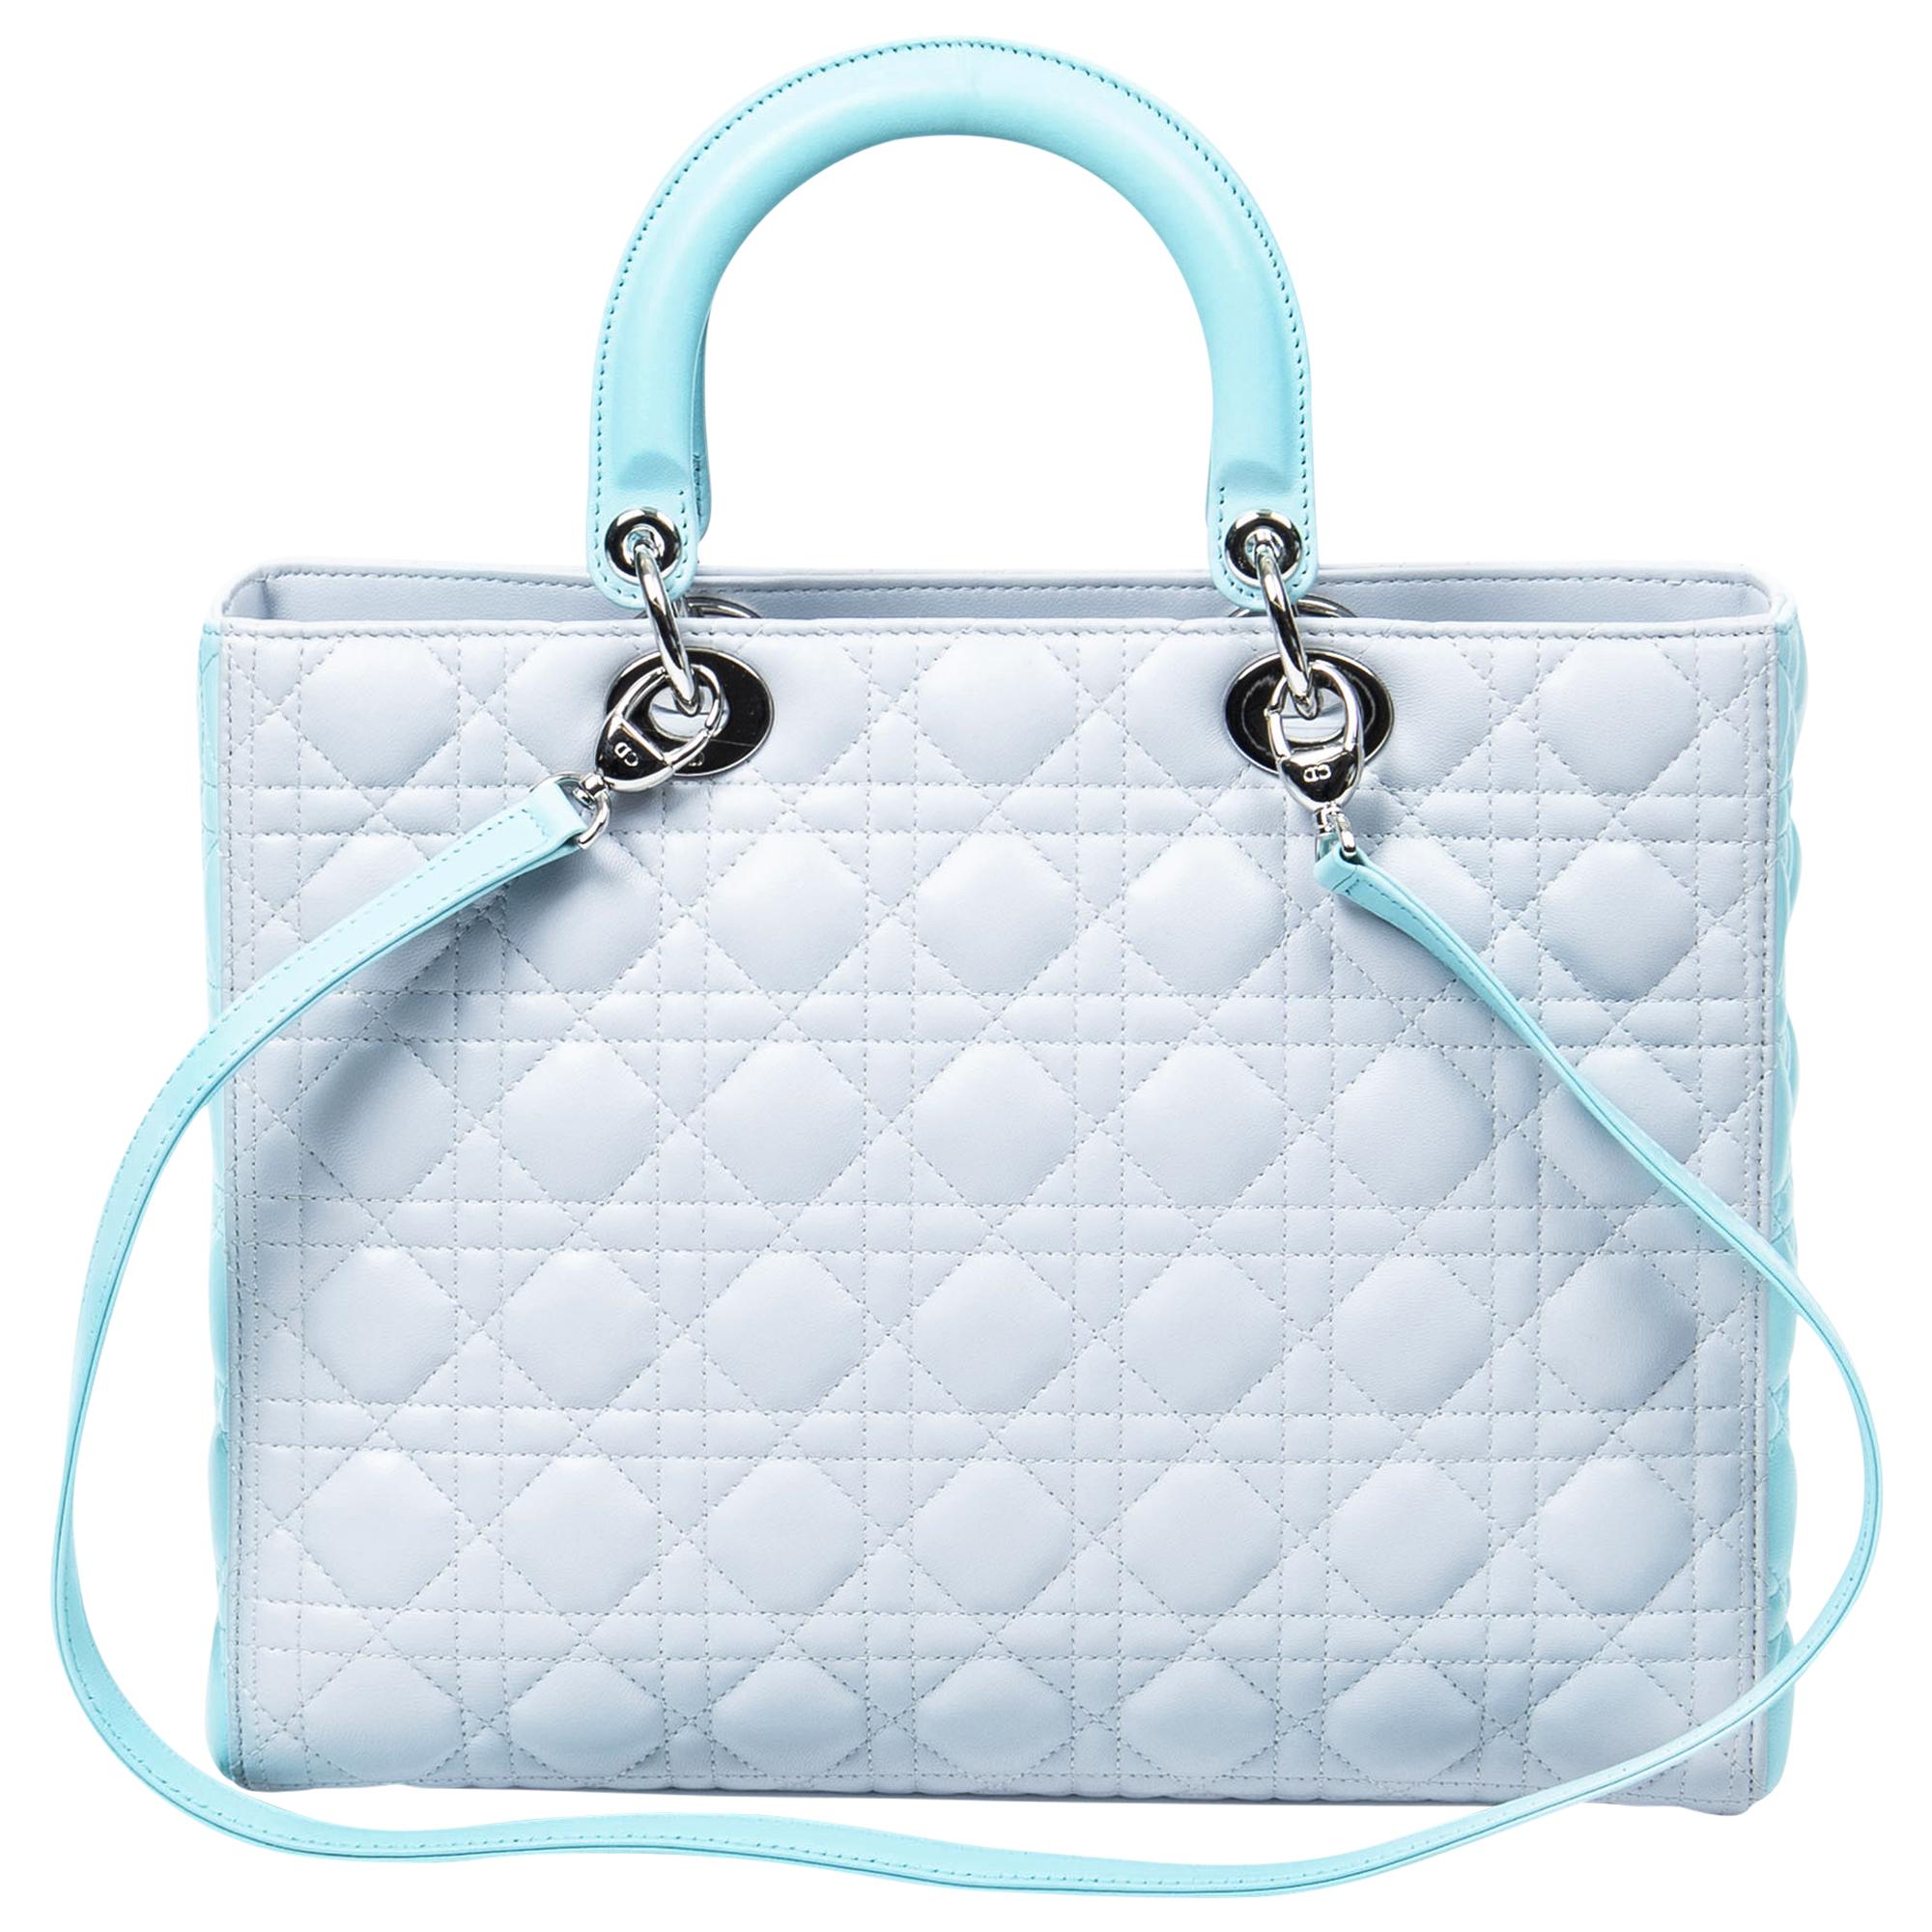 Dior Light Gray/Light Turquoise Large Bicolor Lady Dior In Excellent Condition For Sale In Atlanta, GA